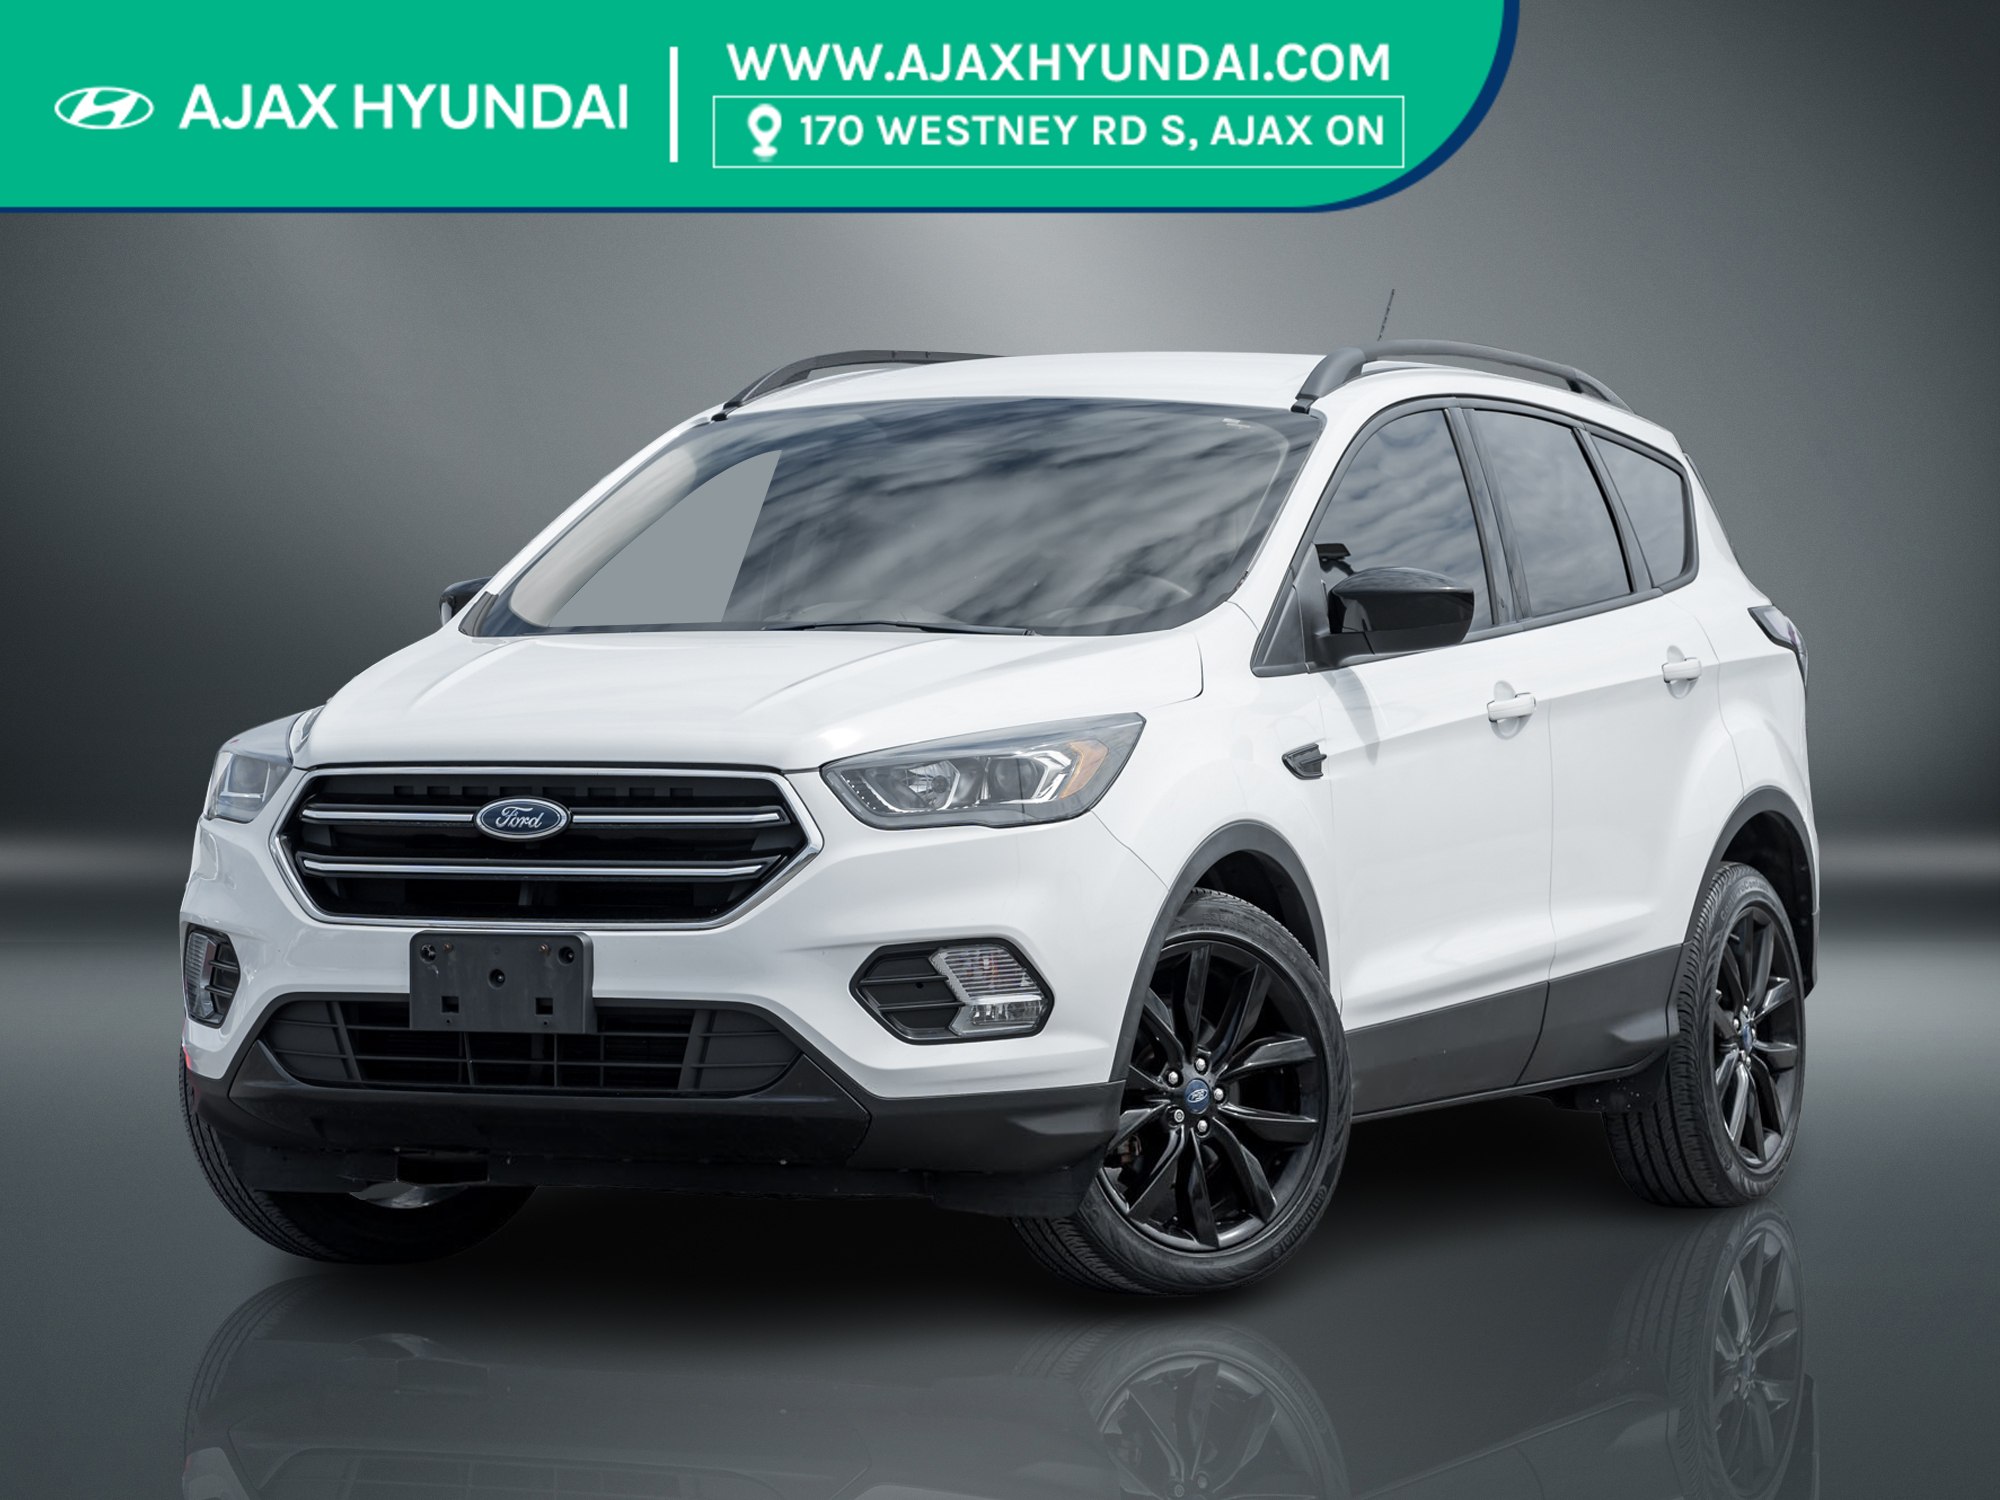 2018 Ford Escape ONE OWNER | NO ACCIDENT